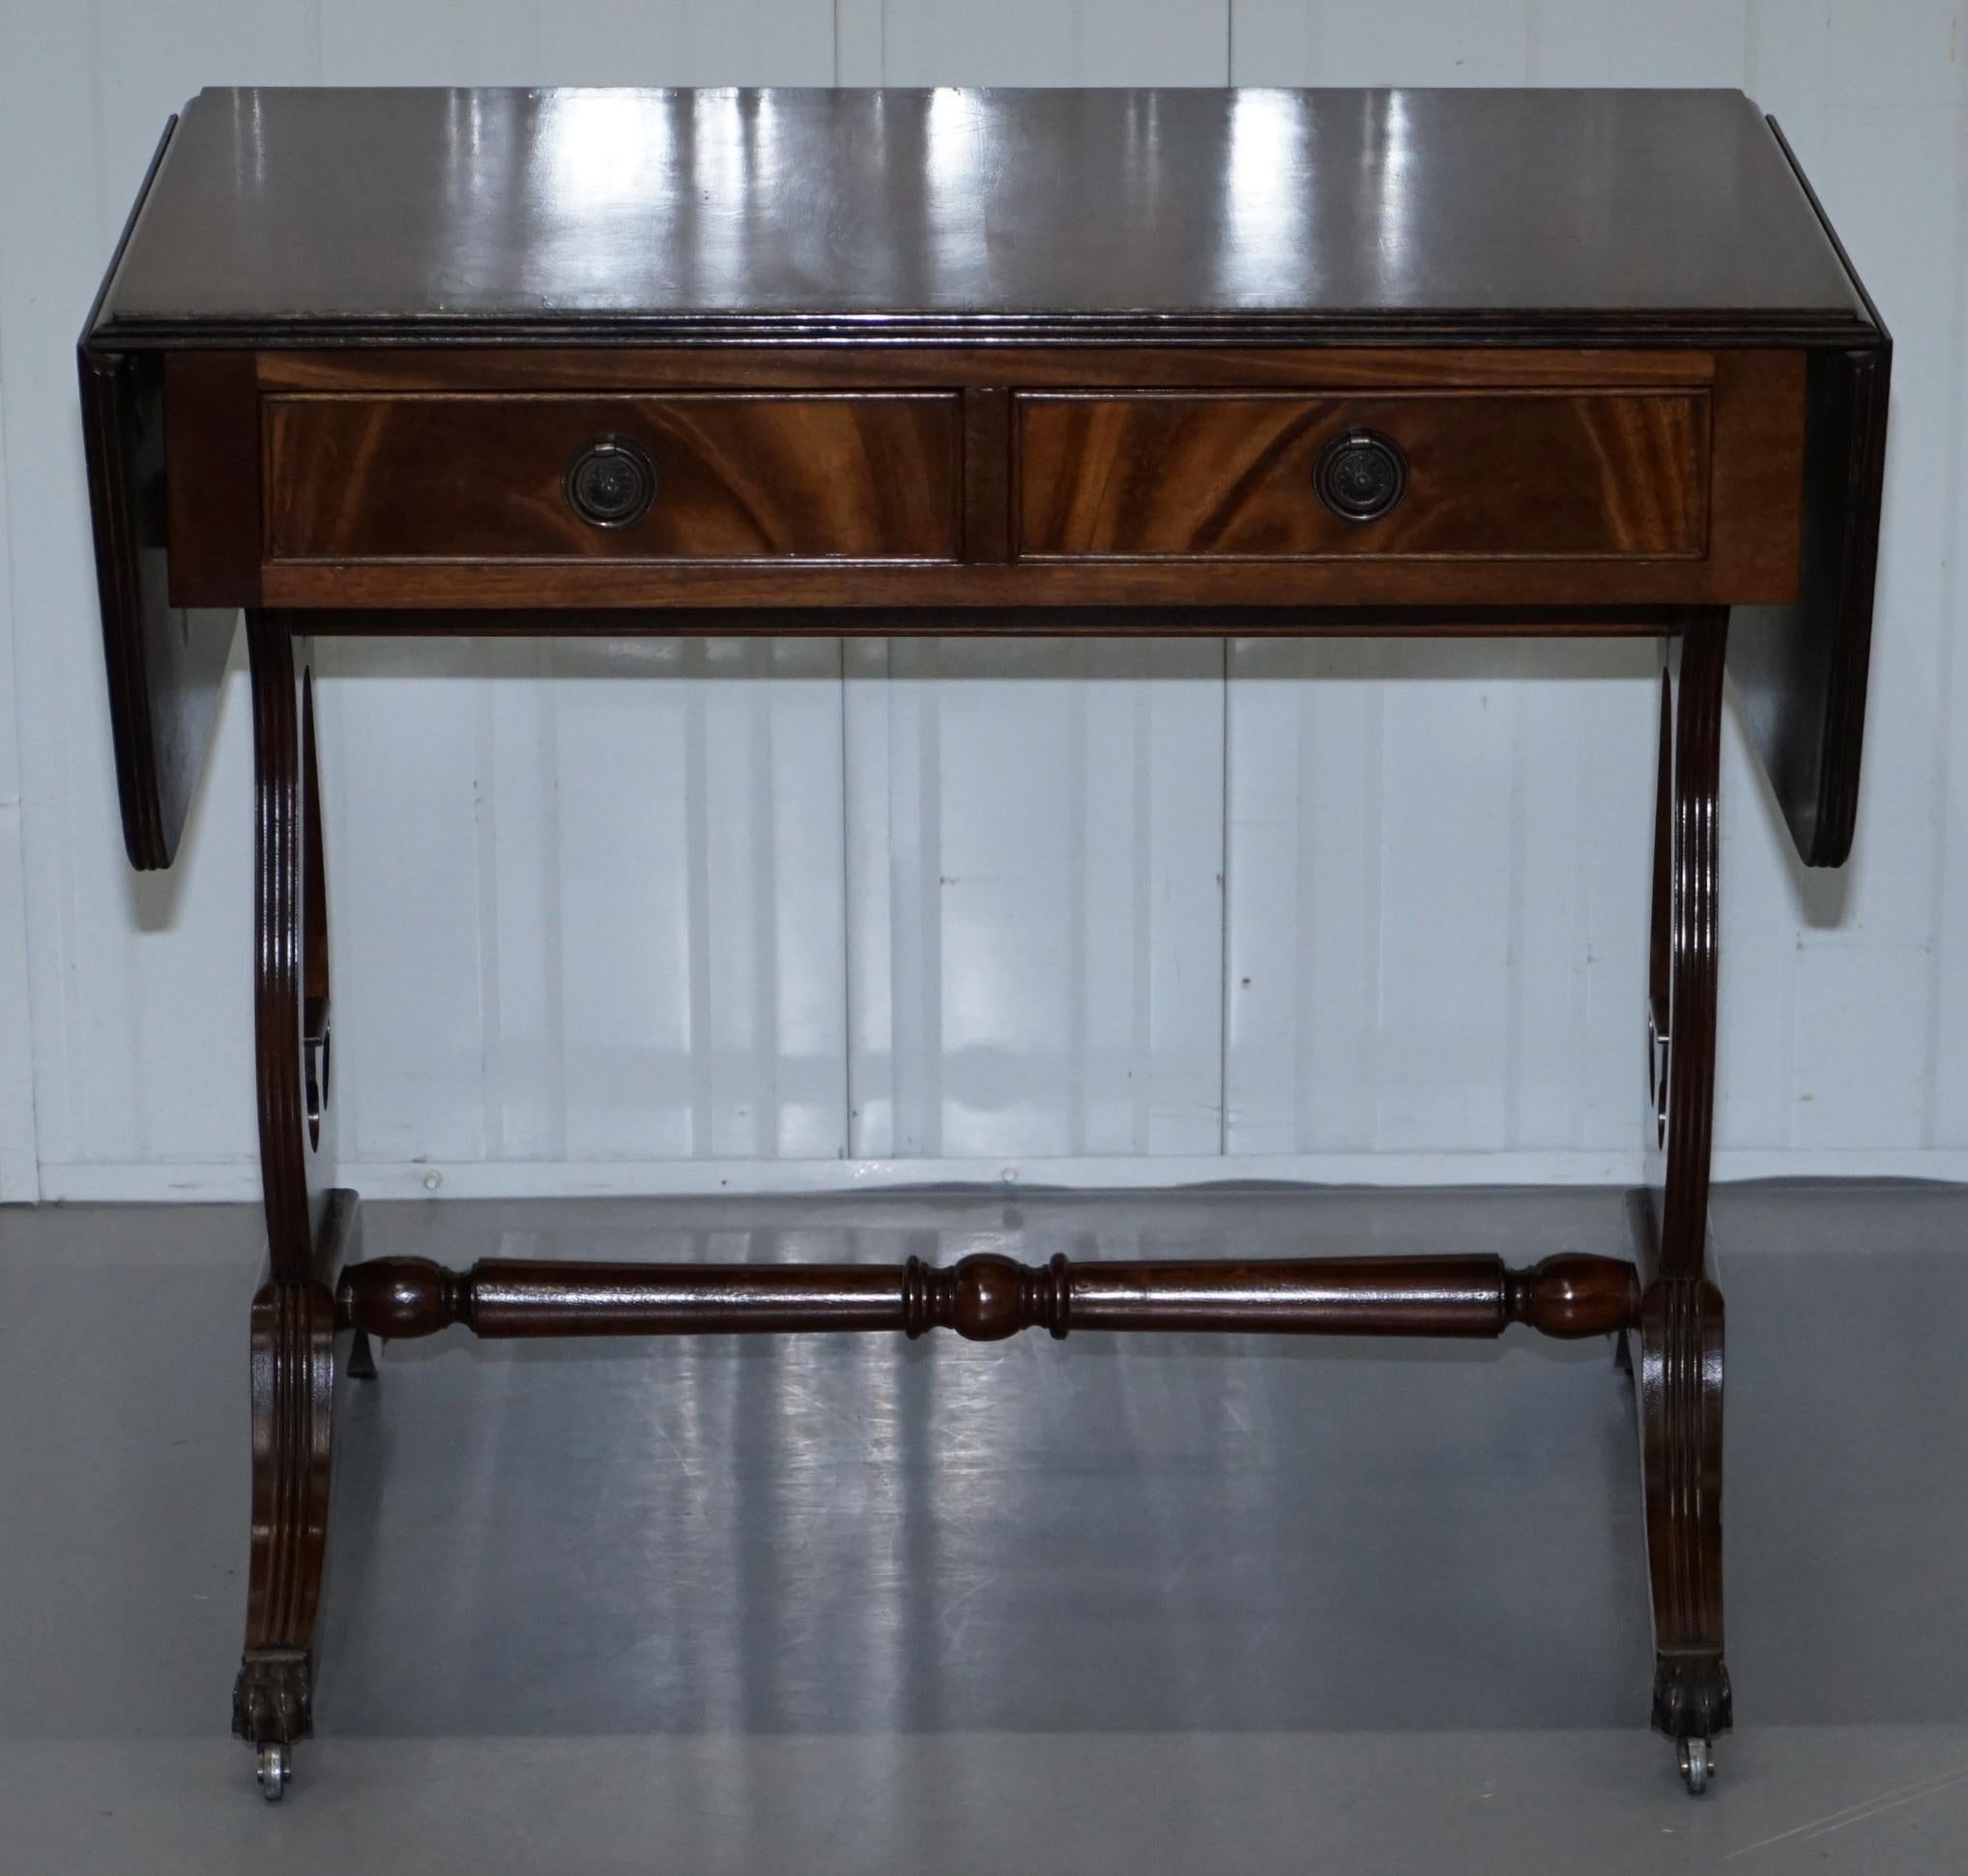 We are delighted to offer for sale this lovely large Bevan Funnell vintage mahogany side table with extending top twin drawers and Oxblood leather top

A very good looking and versatile piece, the table has twin drawers to the front and twin false